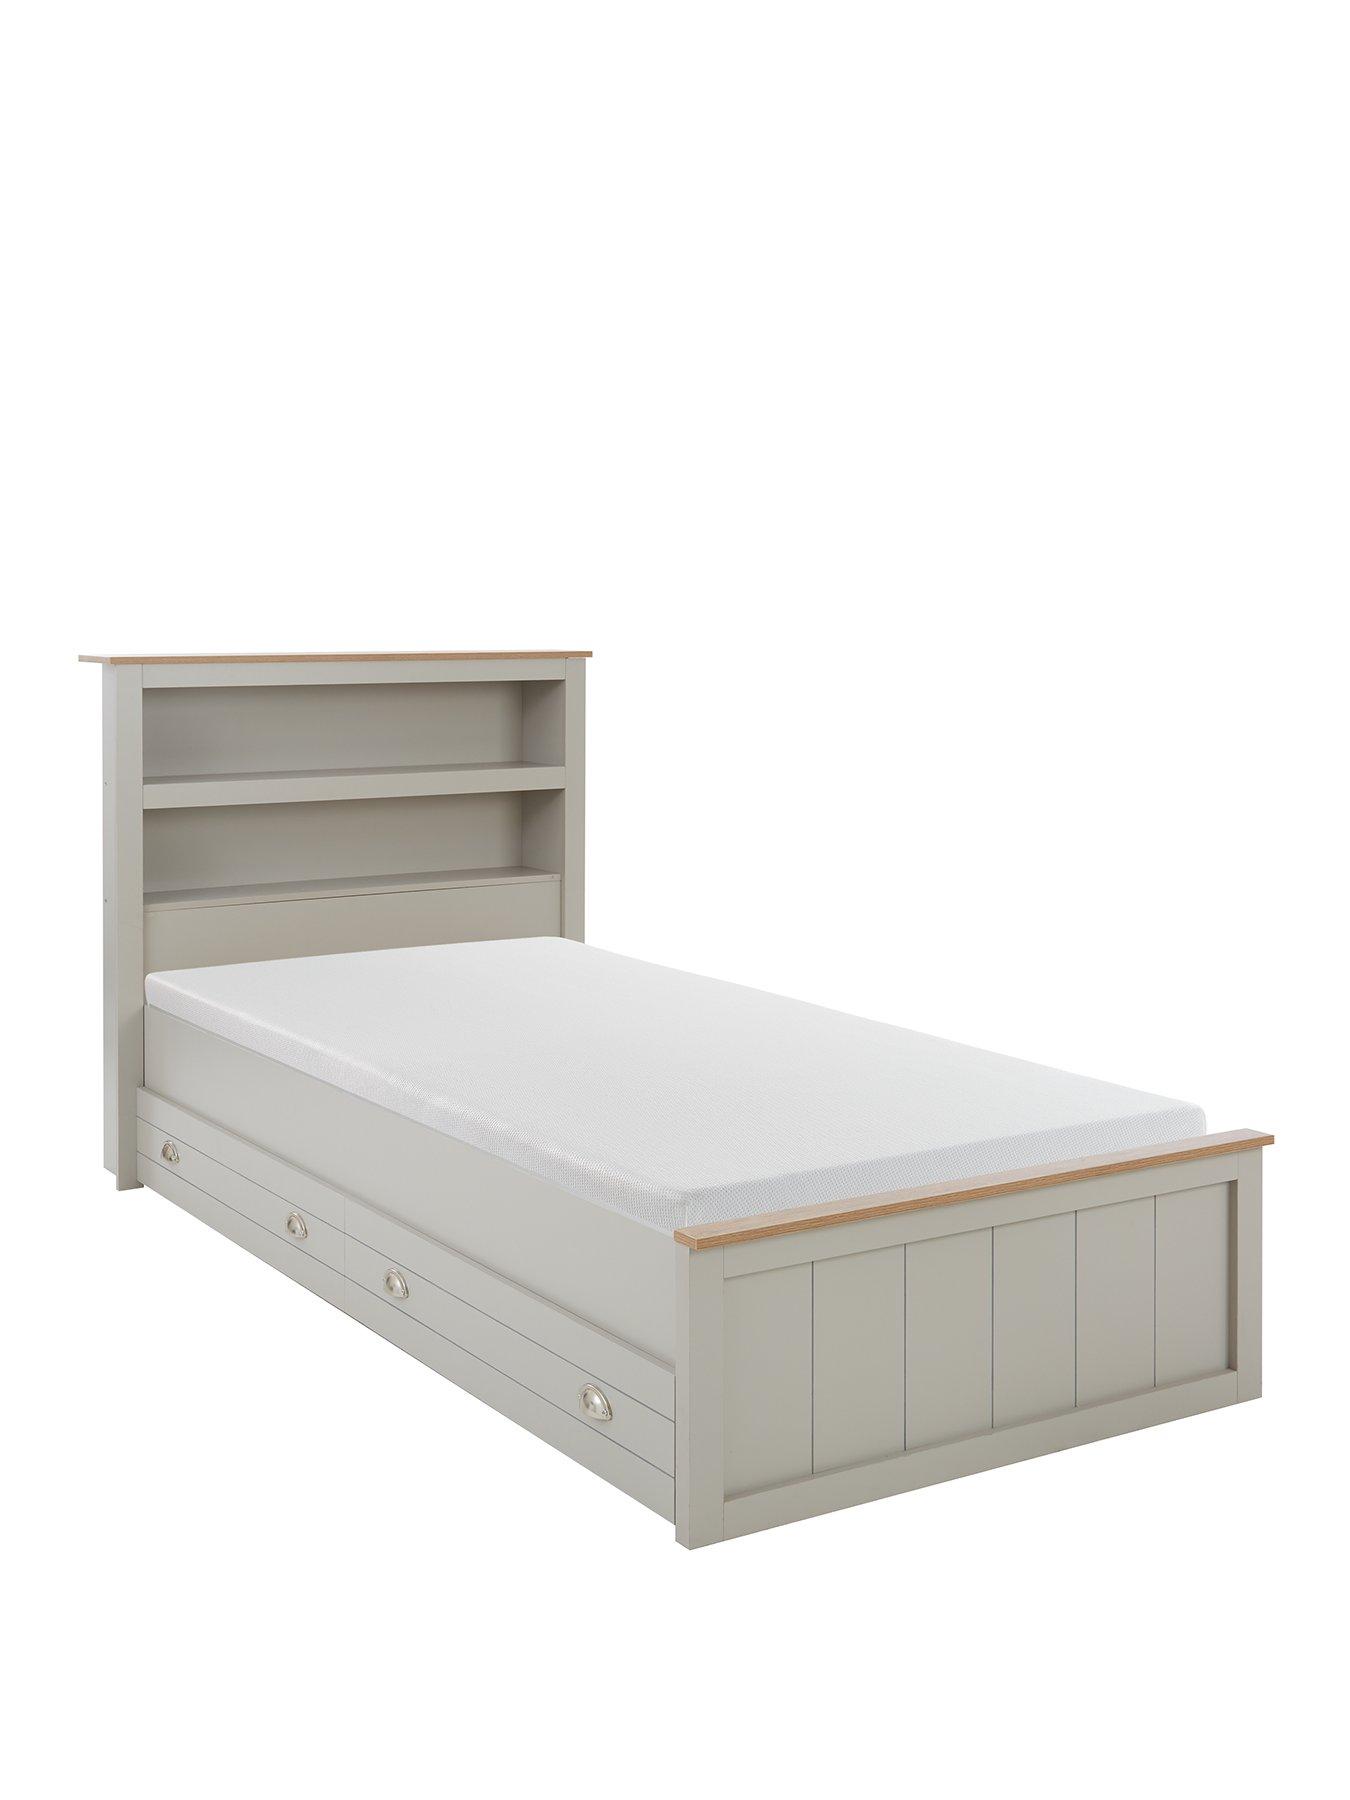 Very Home Atlanta Kids Single 2 Drawer Bed With Mattress Options (Buy And Save!) - Grey/Oak - Bed Frame With Standard Mattress